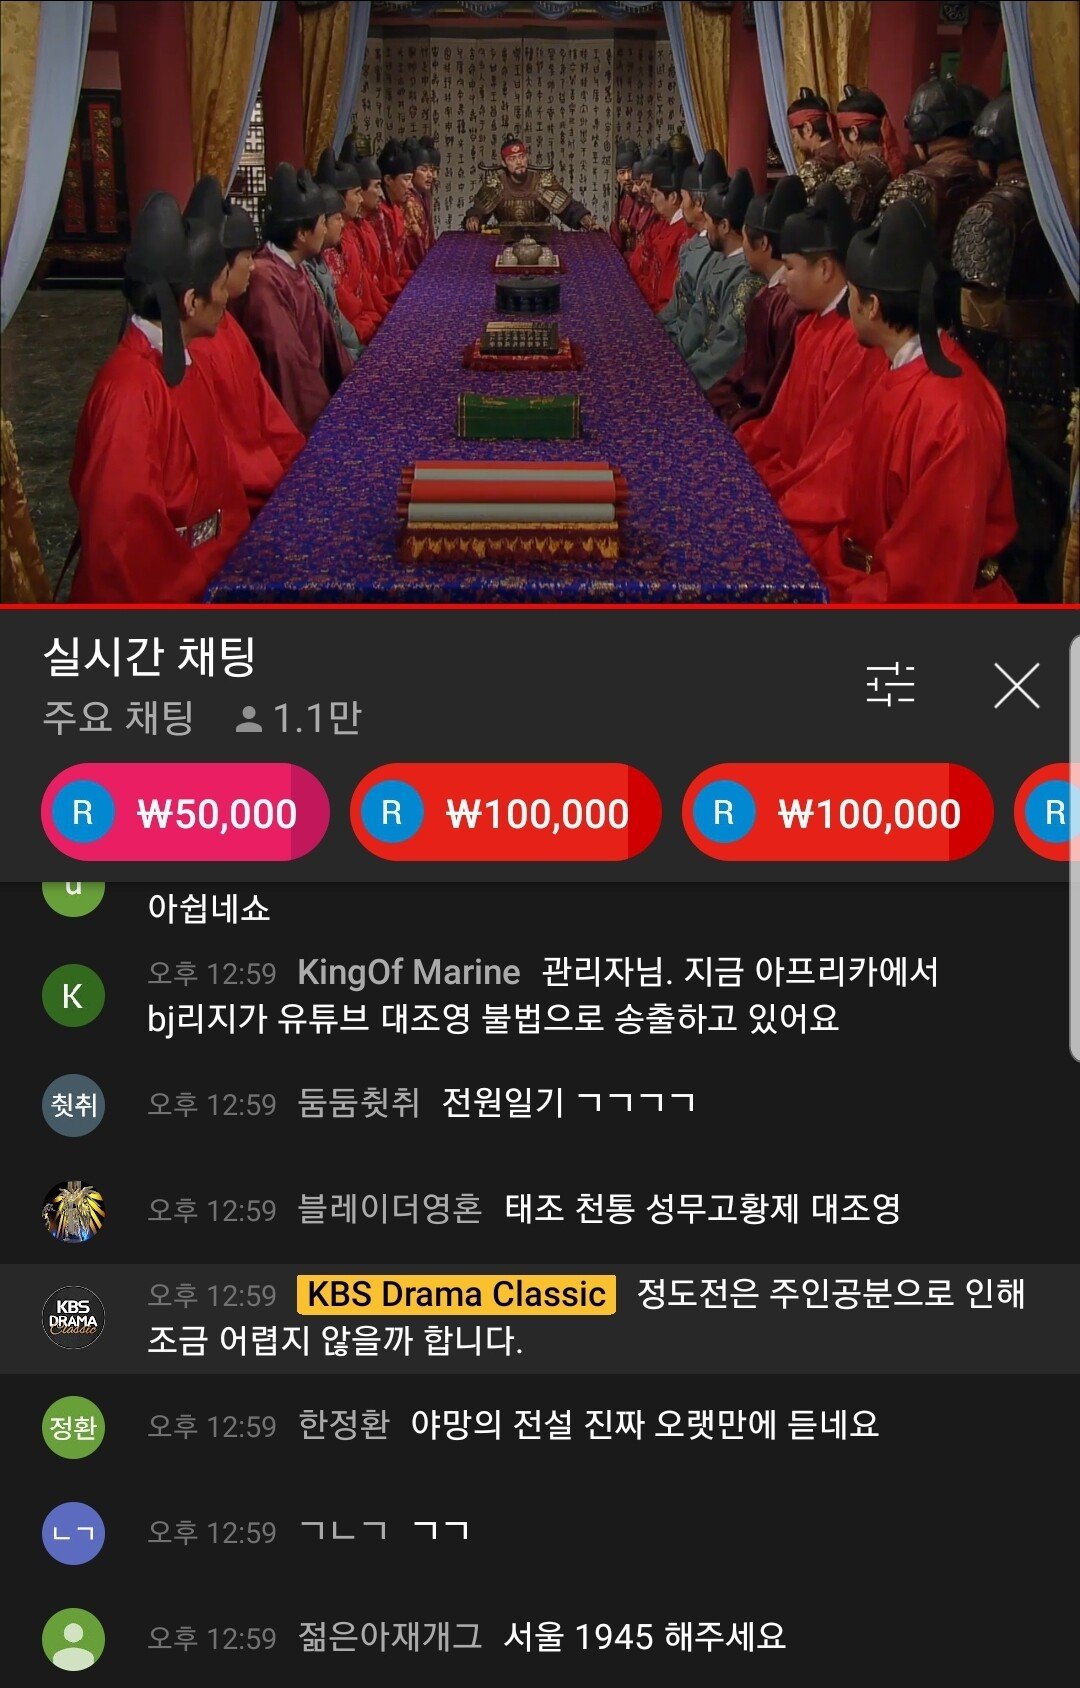 According to KBS YouTube administrator, "Streaming before Jung Do is difficult."